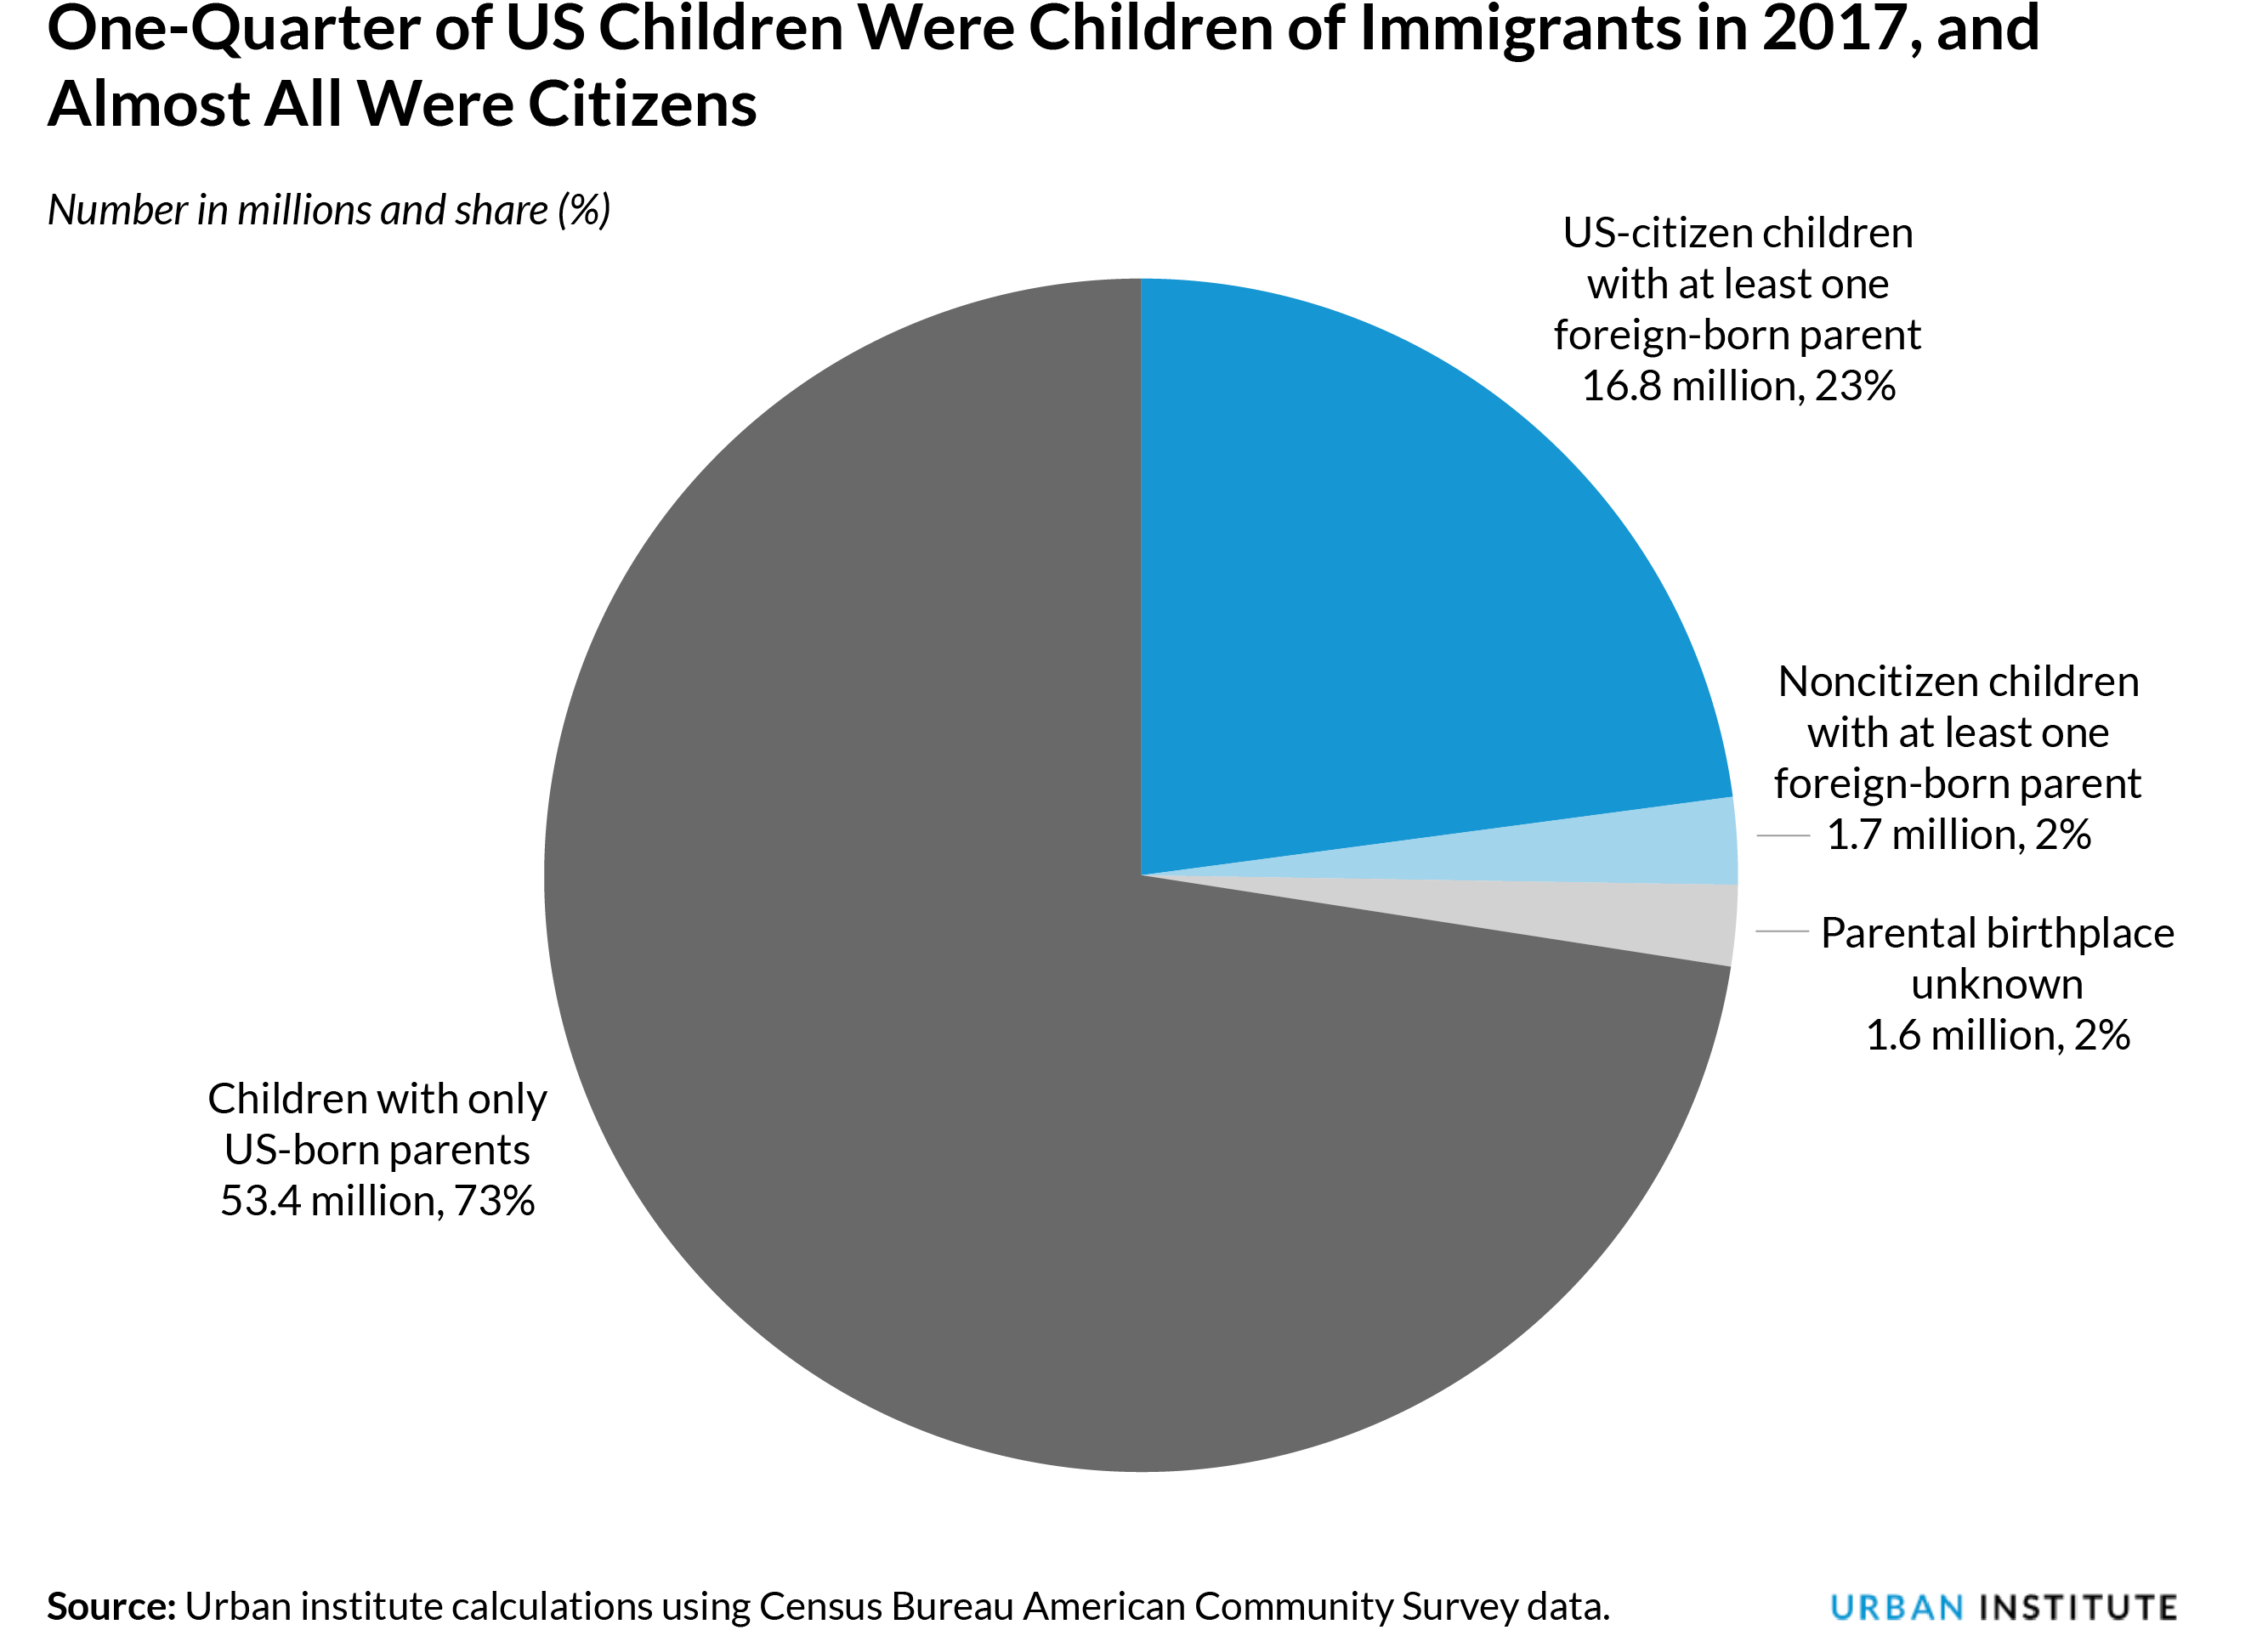 One-Quarter of US Children Were Children of Immigrants in 2017, and Almost All Were Citizens, Number in millions and share (%)